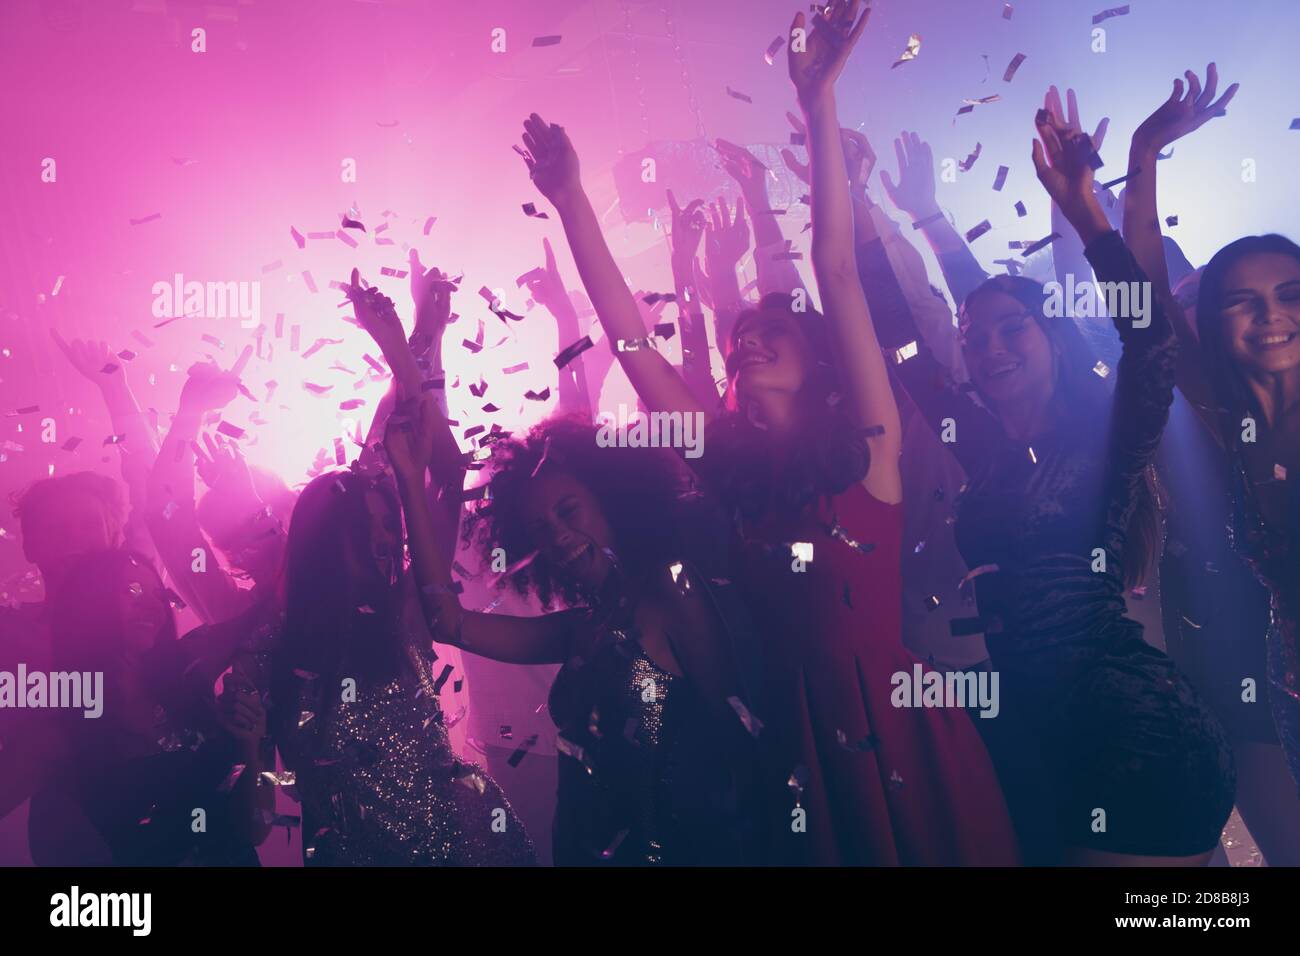 Photo of big group many classy girls falling confetti catch arms neon ...